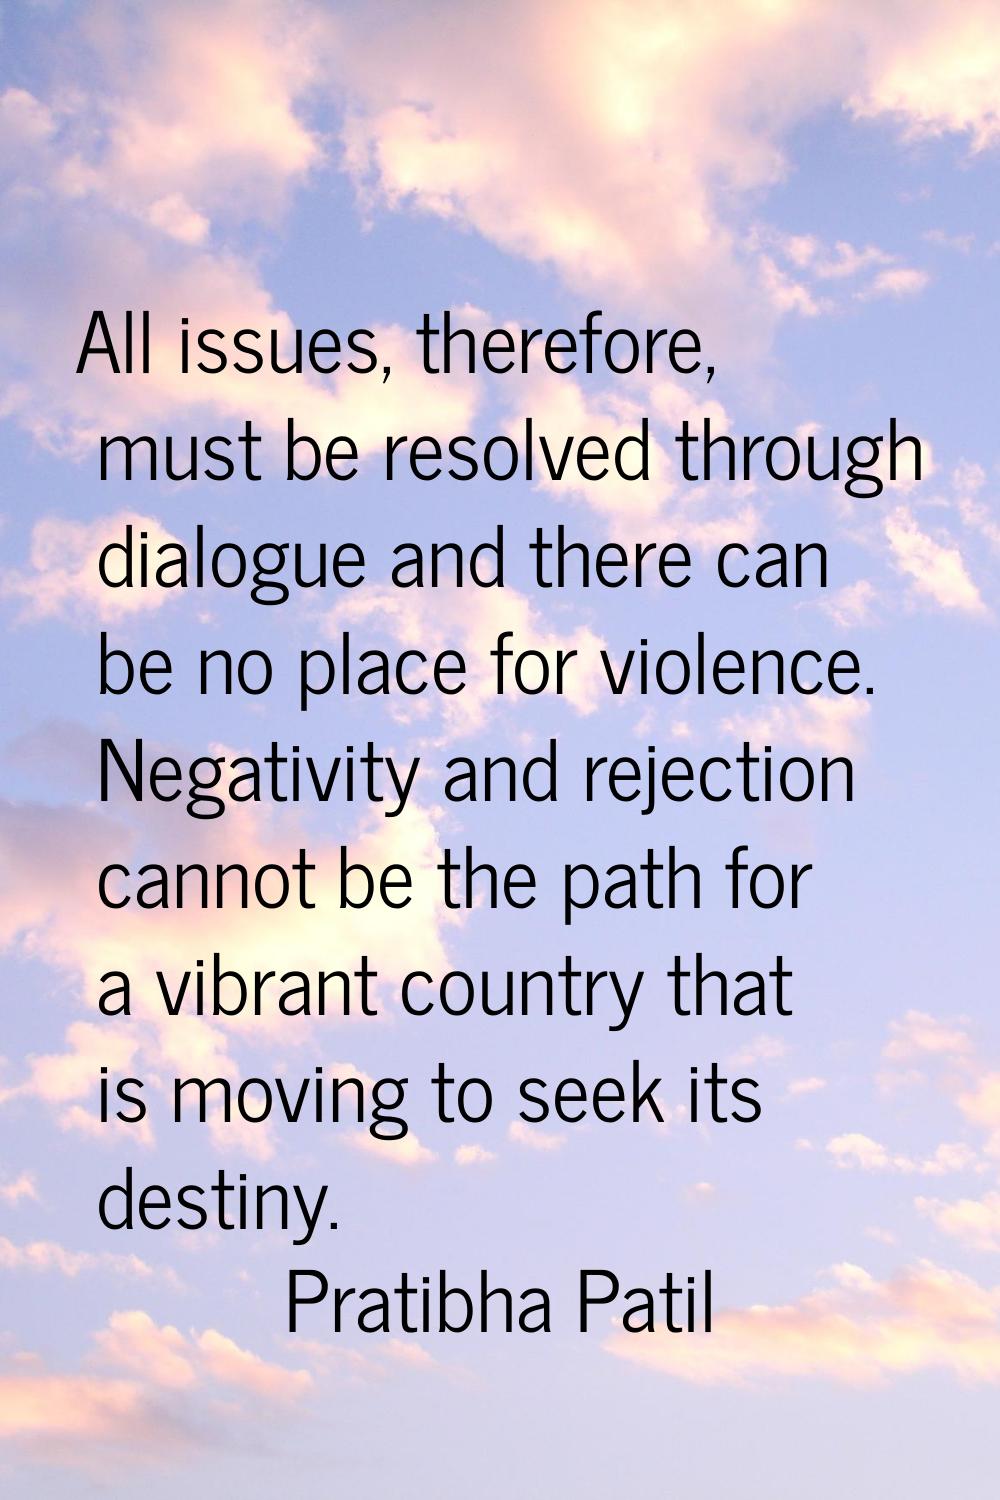 All issues, therefore, must be resolved through dialogue and there can be no place for violence. Ne